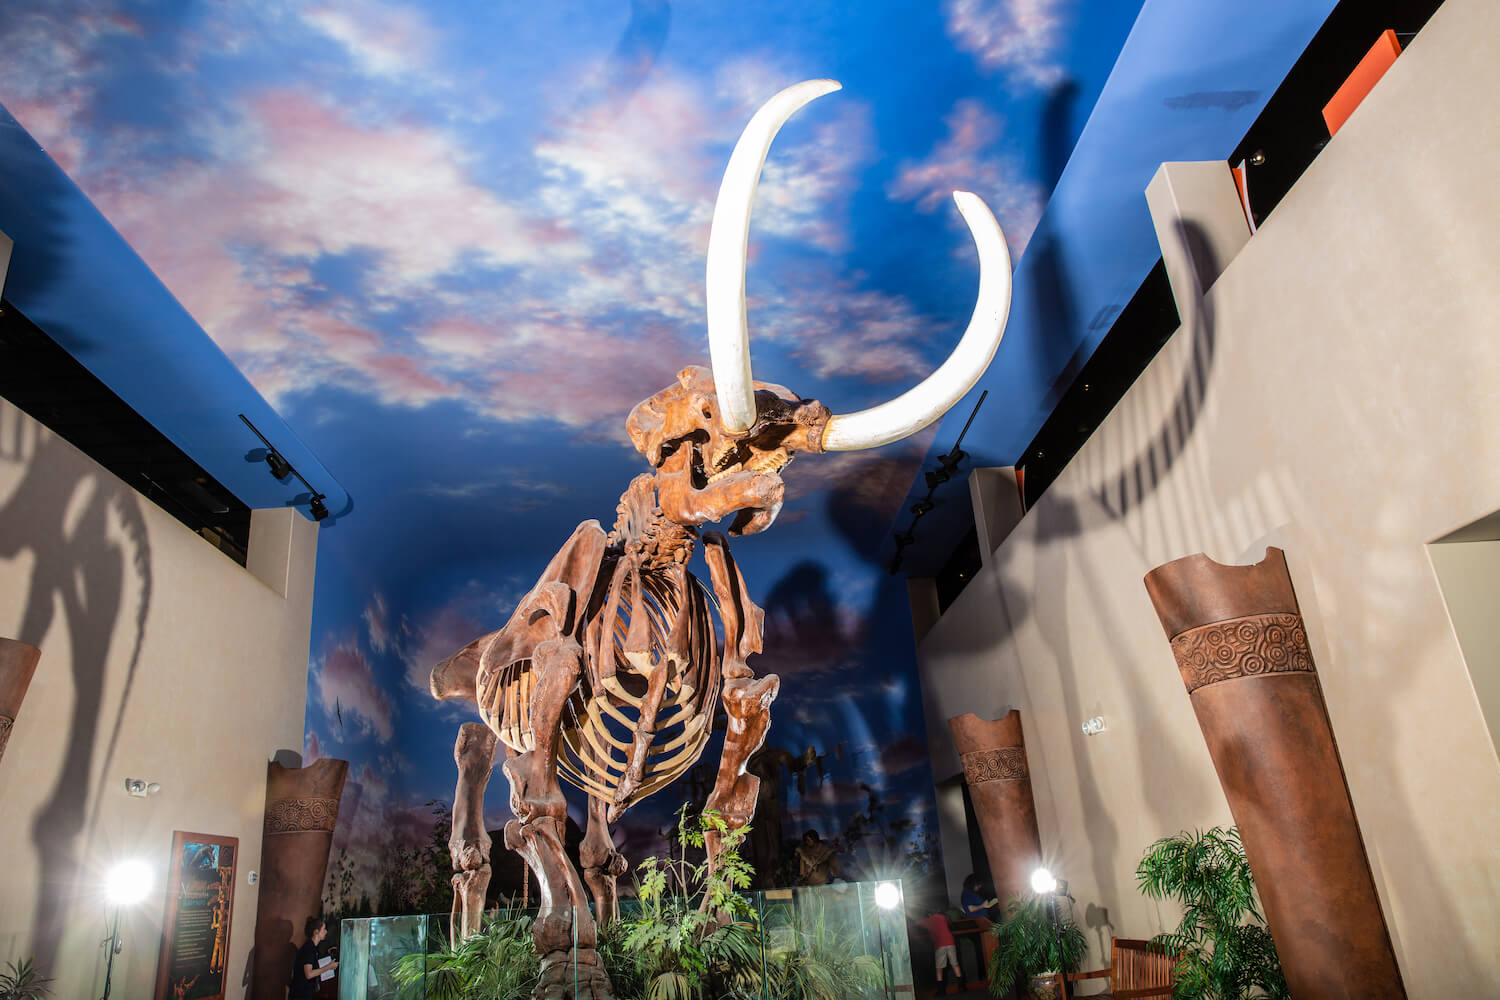 Priscilla the mastodon at the The The Bishop Museum of Science + Nature